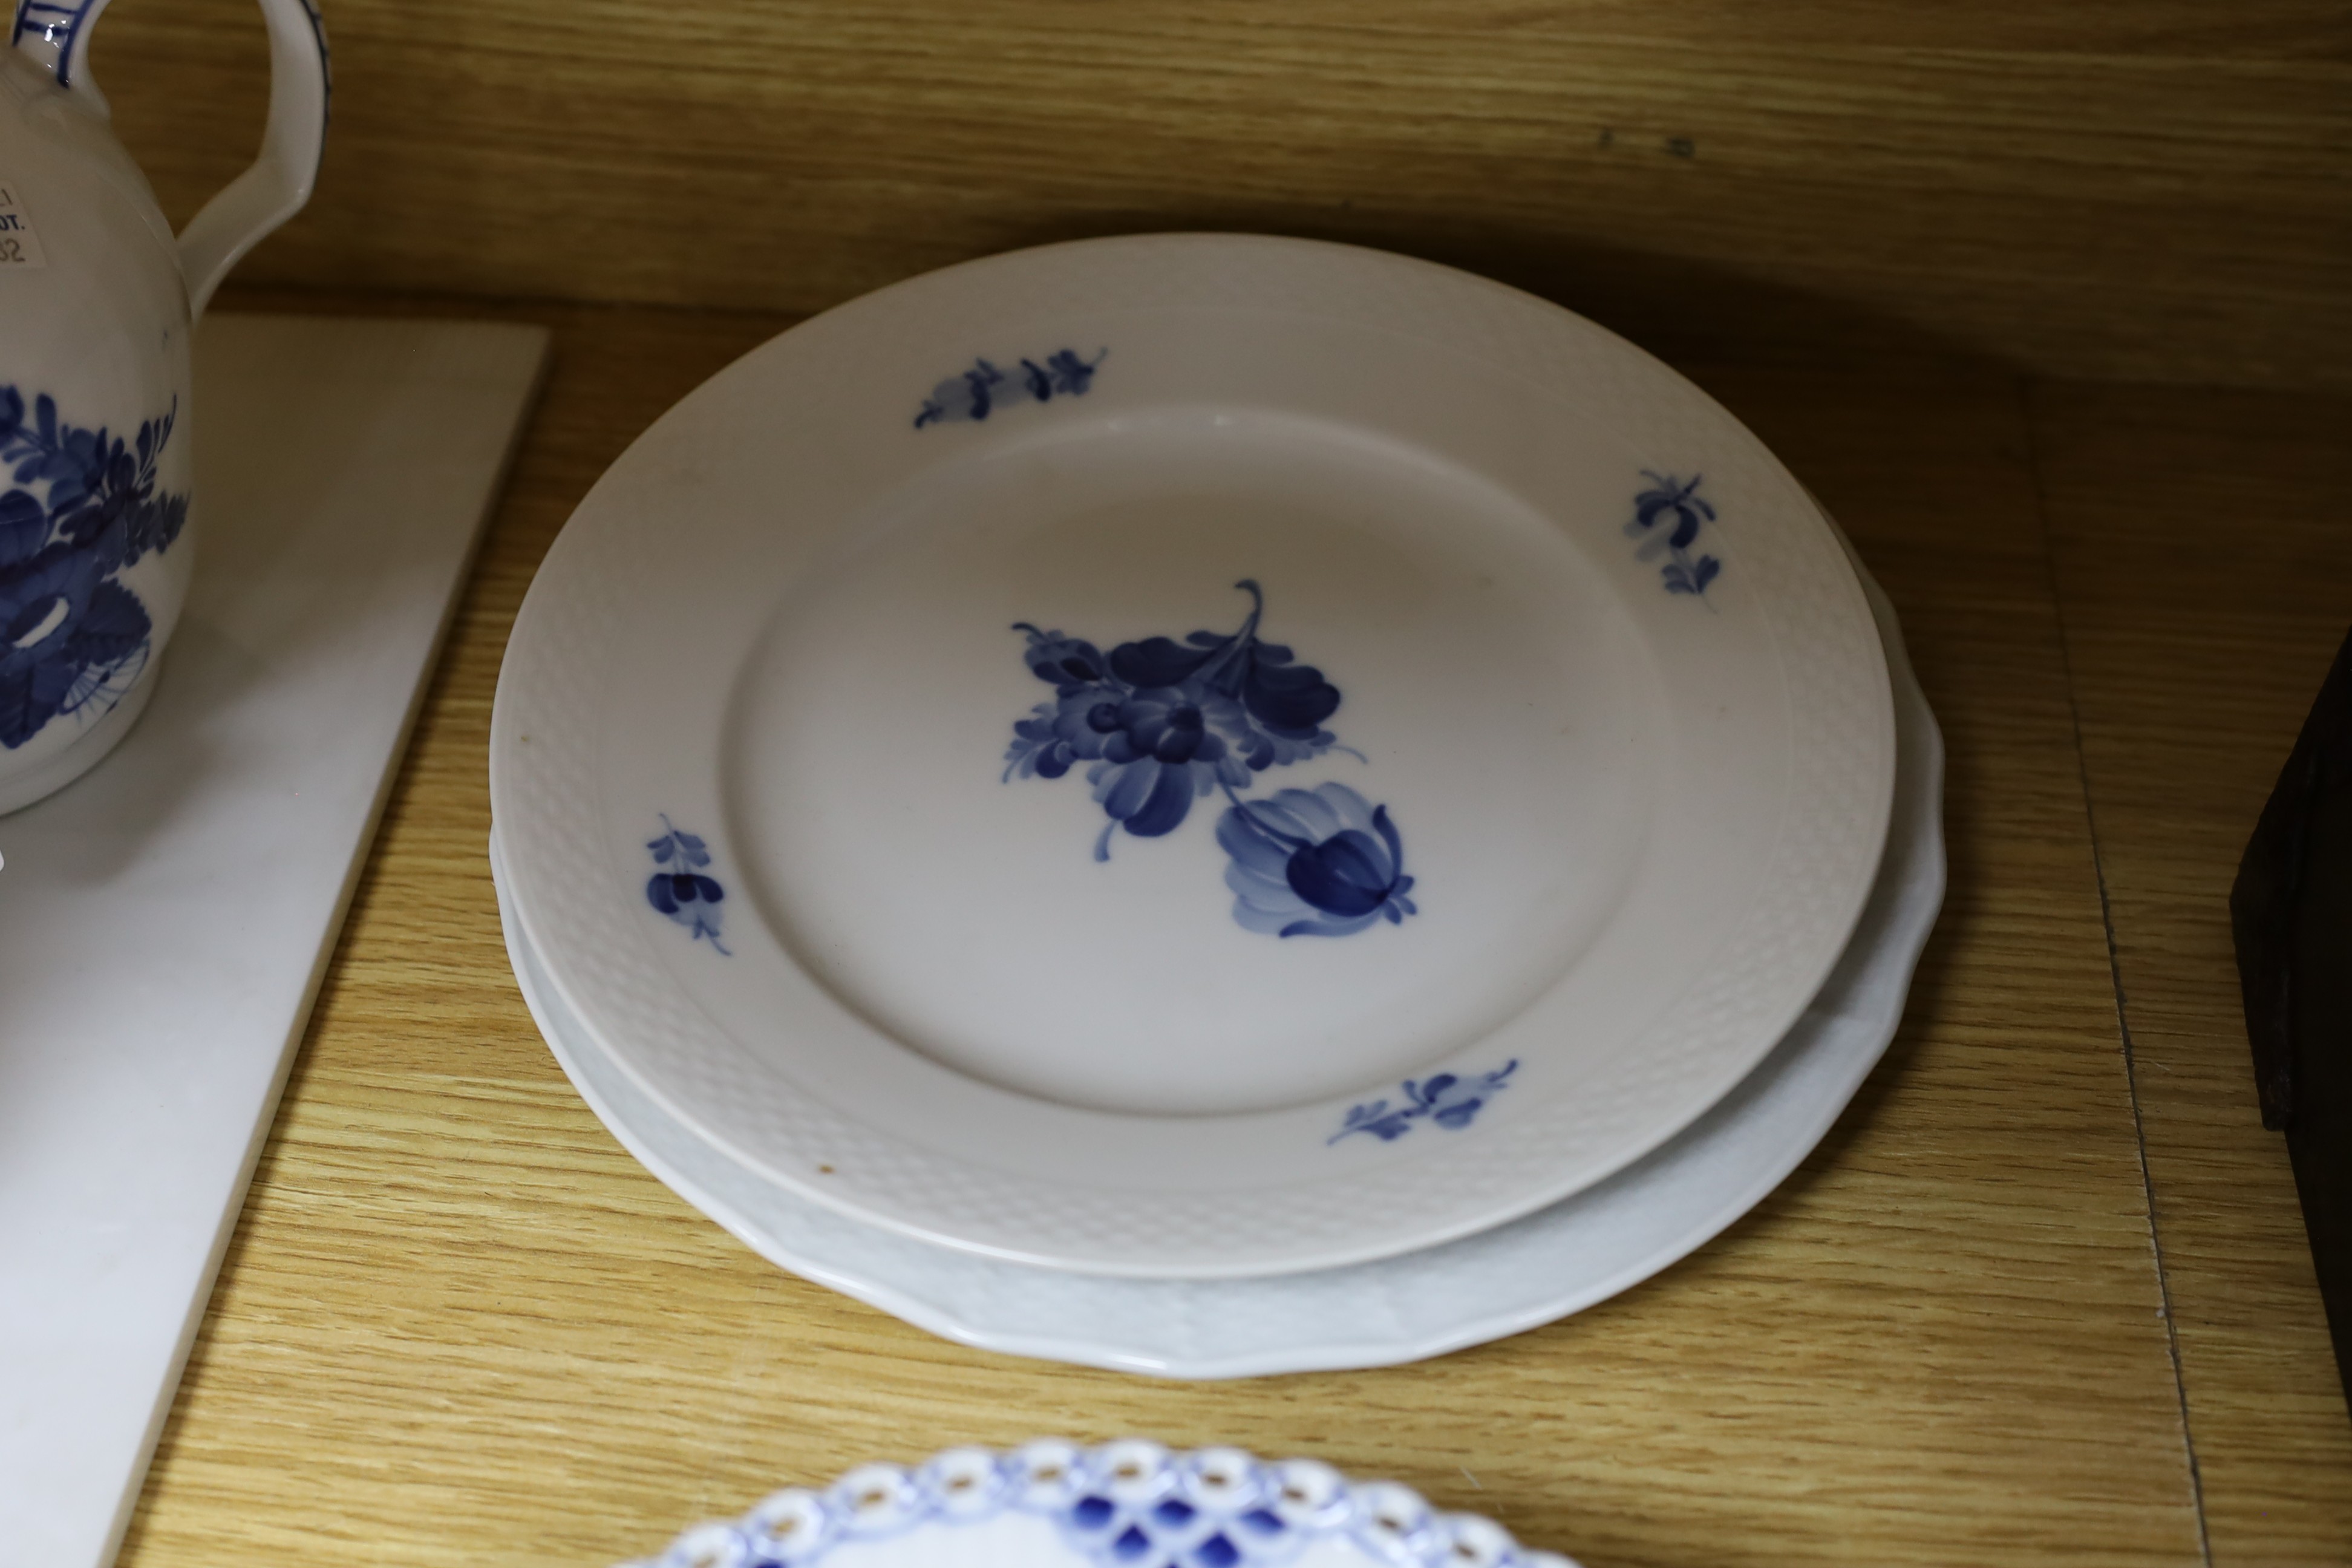 A collection of varying patterns of Royal Copenhagen blue and white tableware